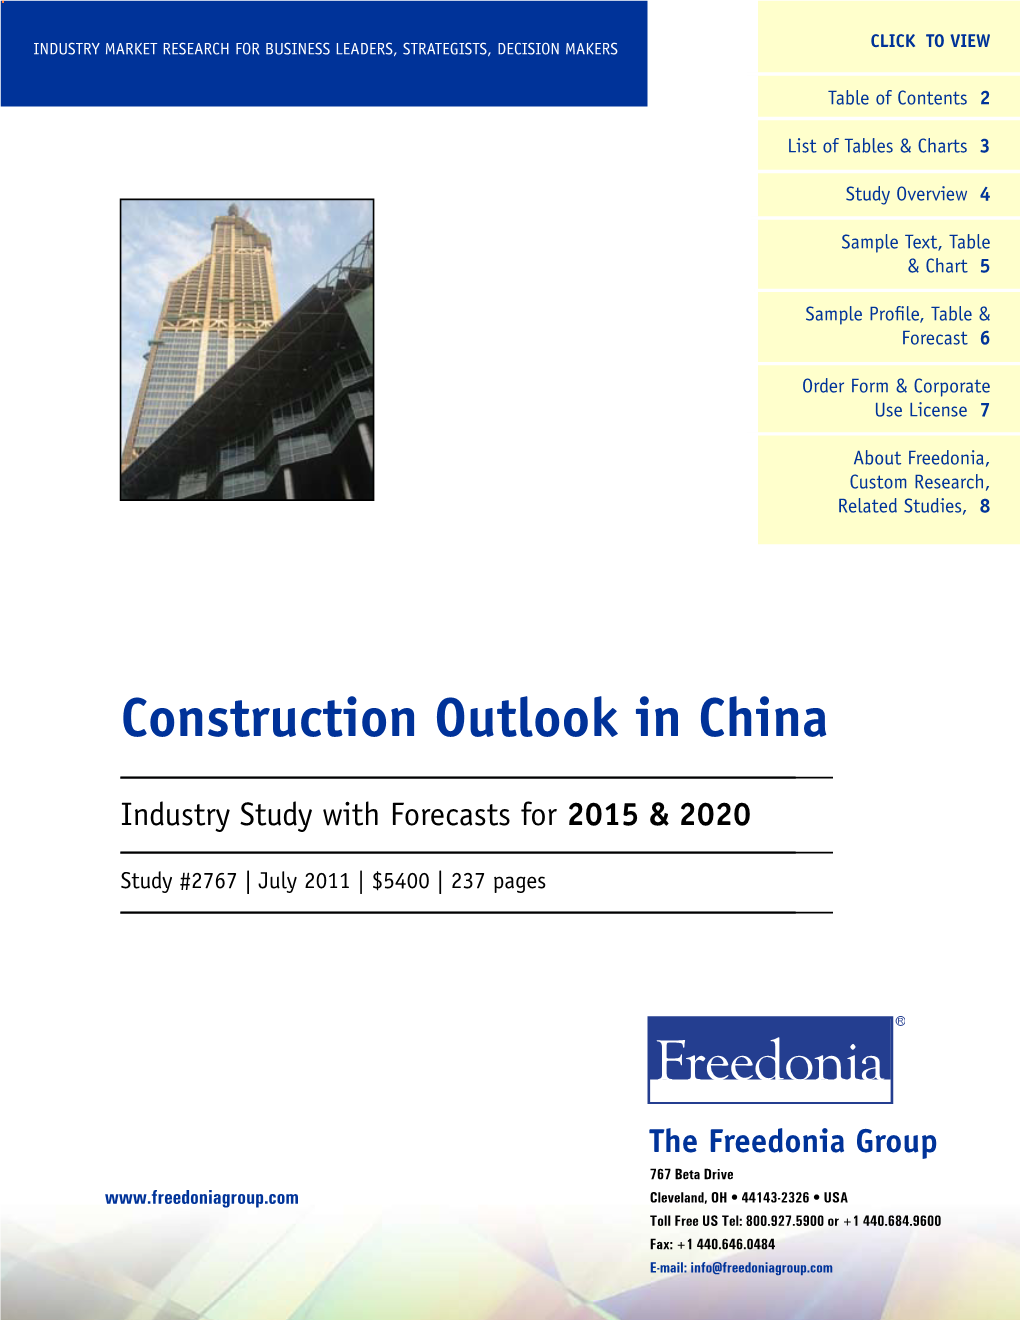 Construction Outlook in China